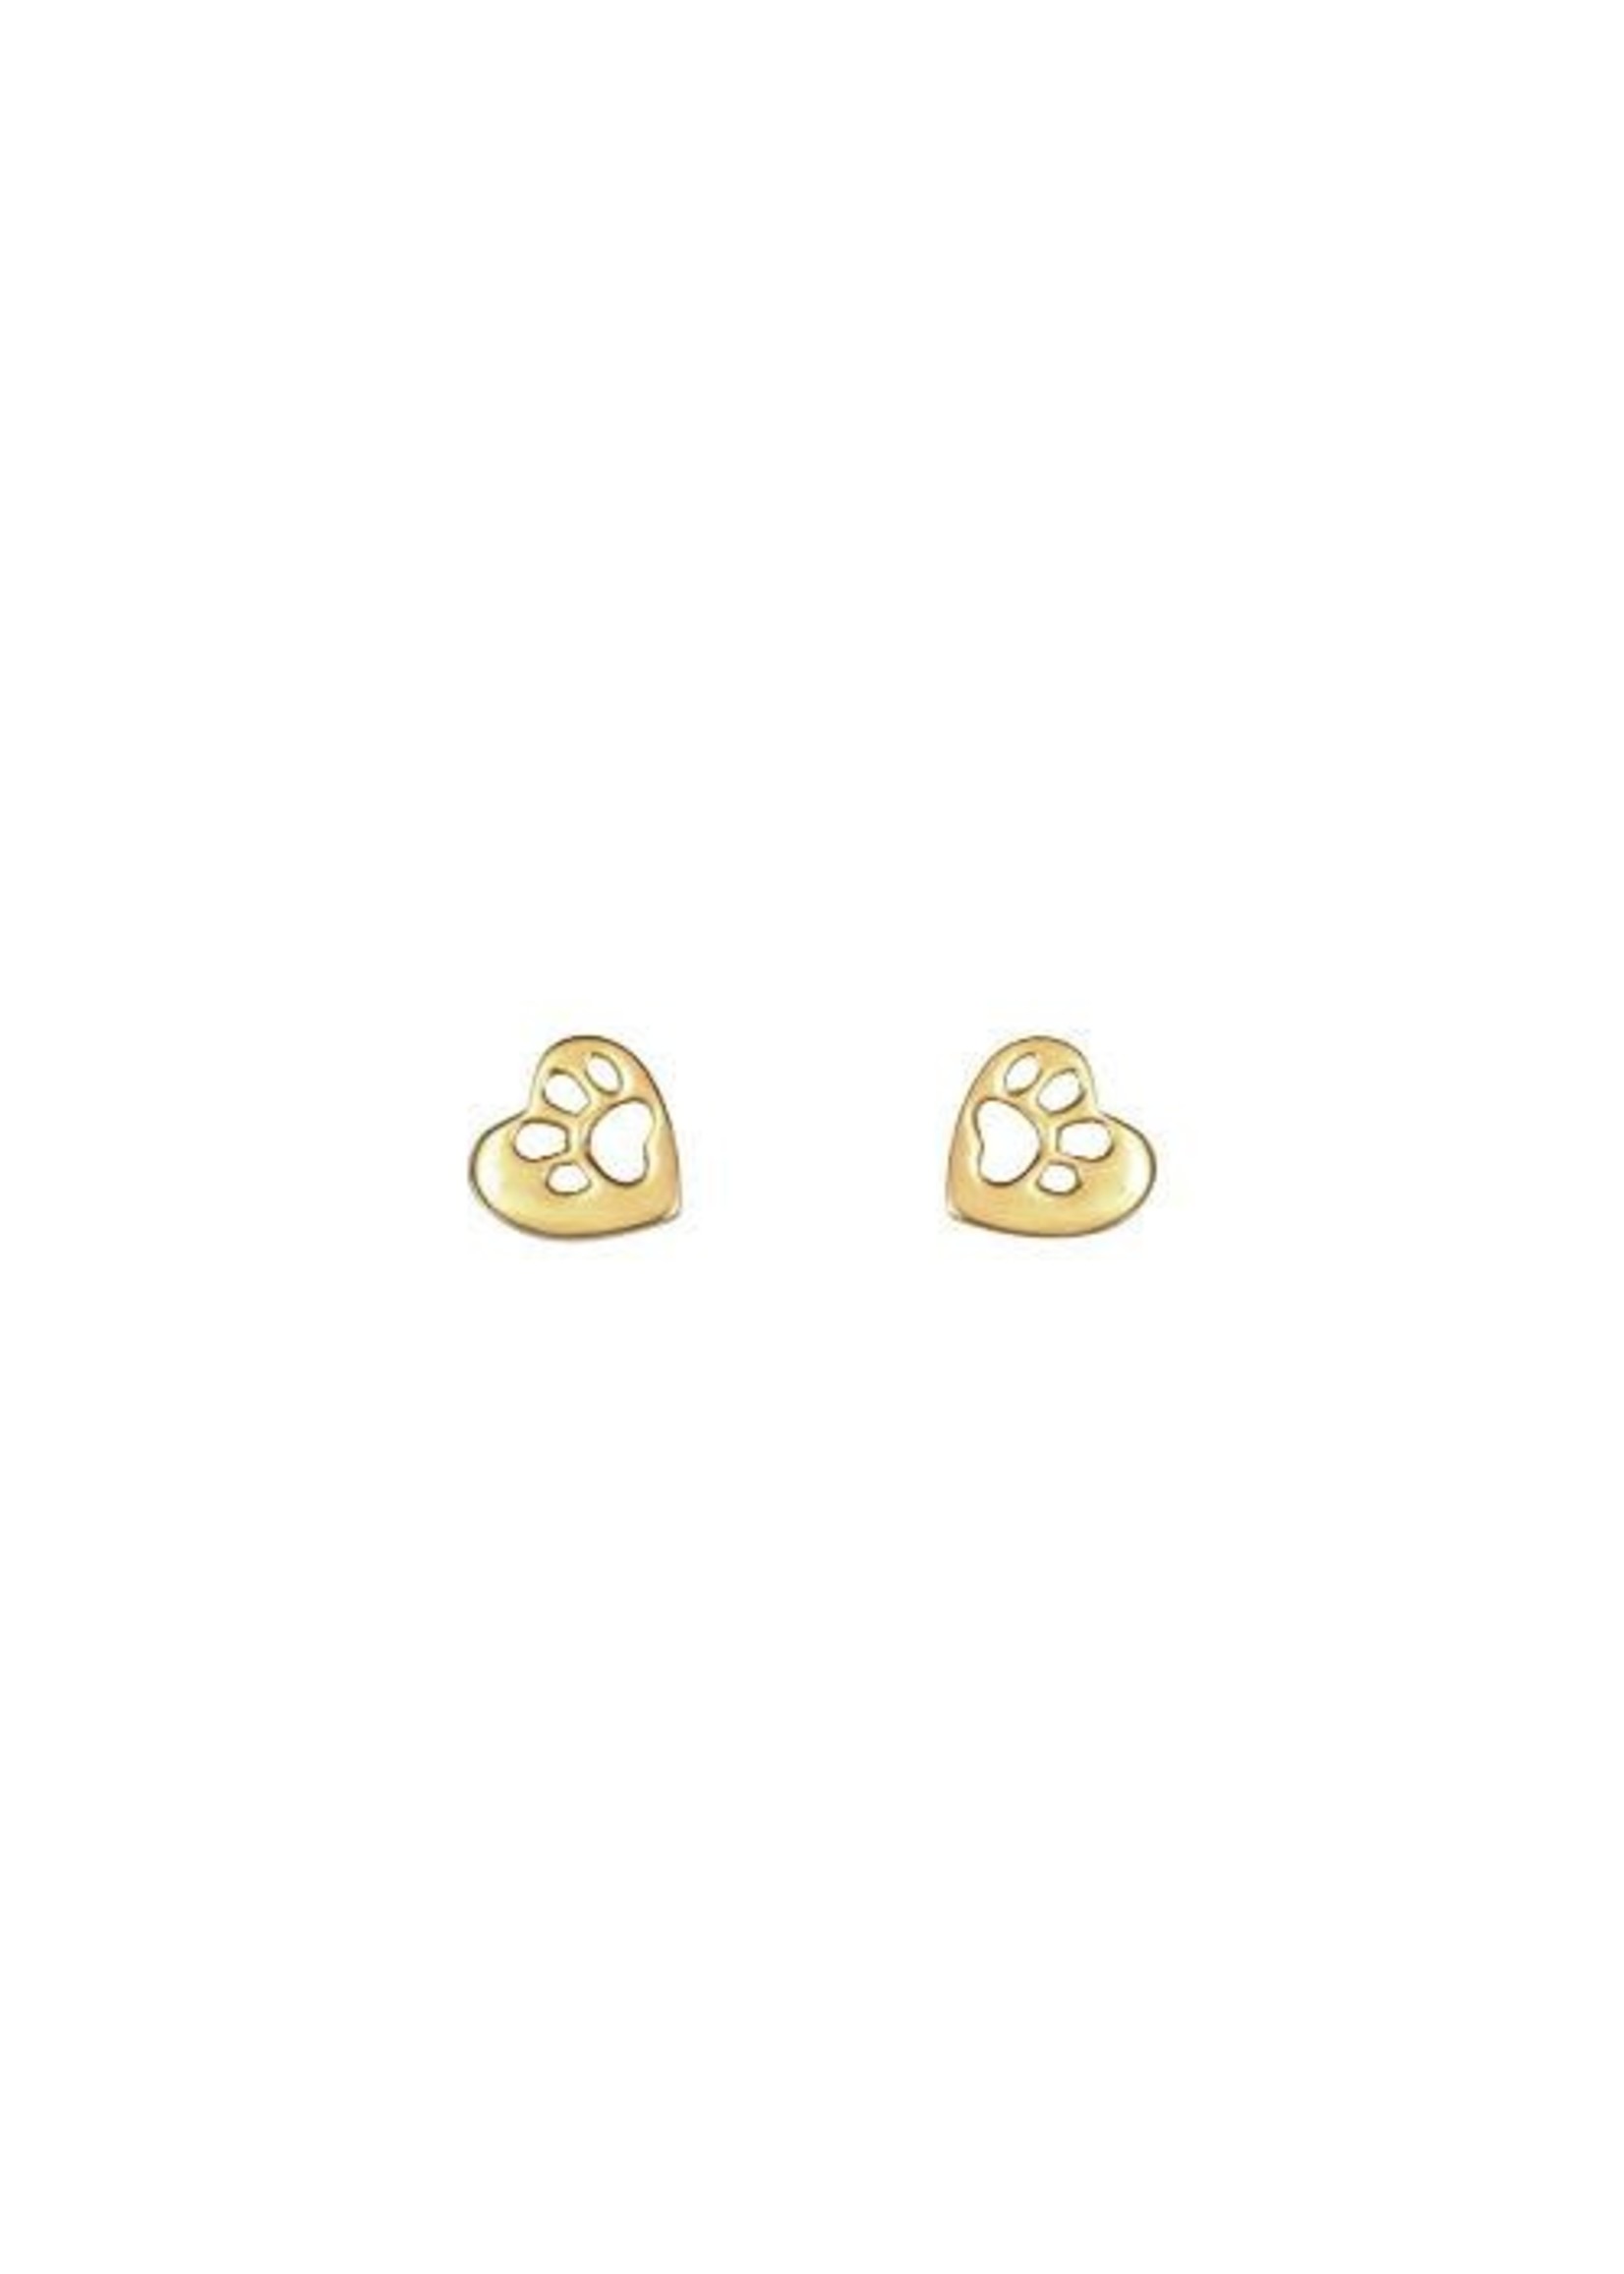 Mimi & Marge PAW PRINT STUD EARRING -14K GOLD VERMEILLE